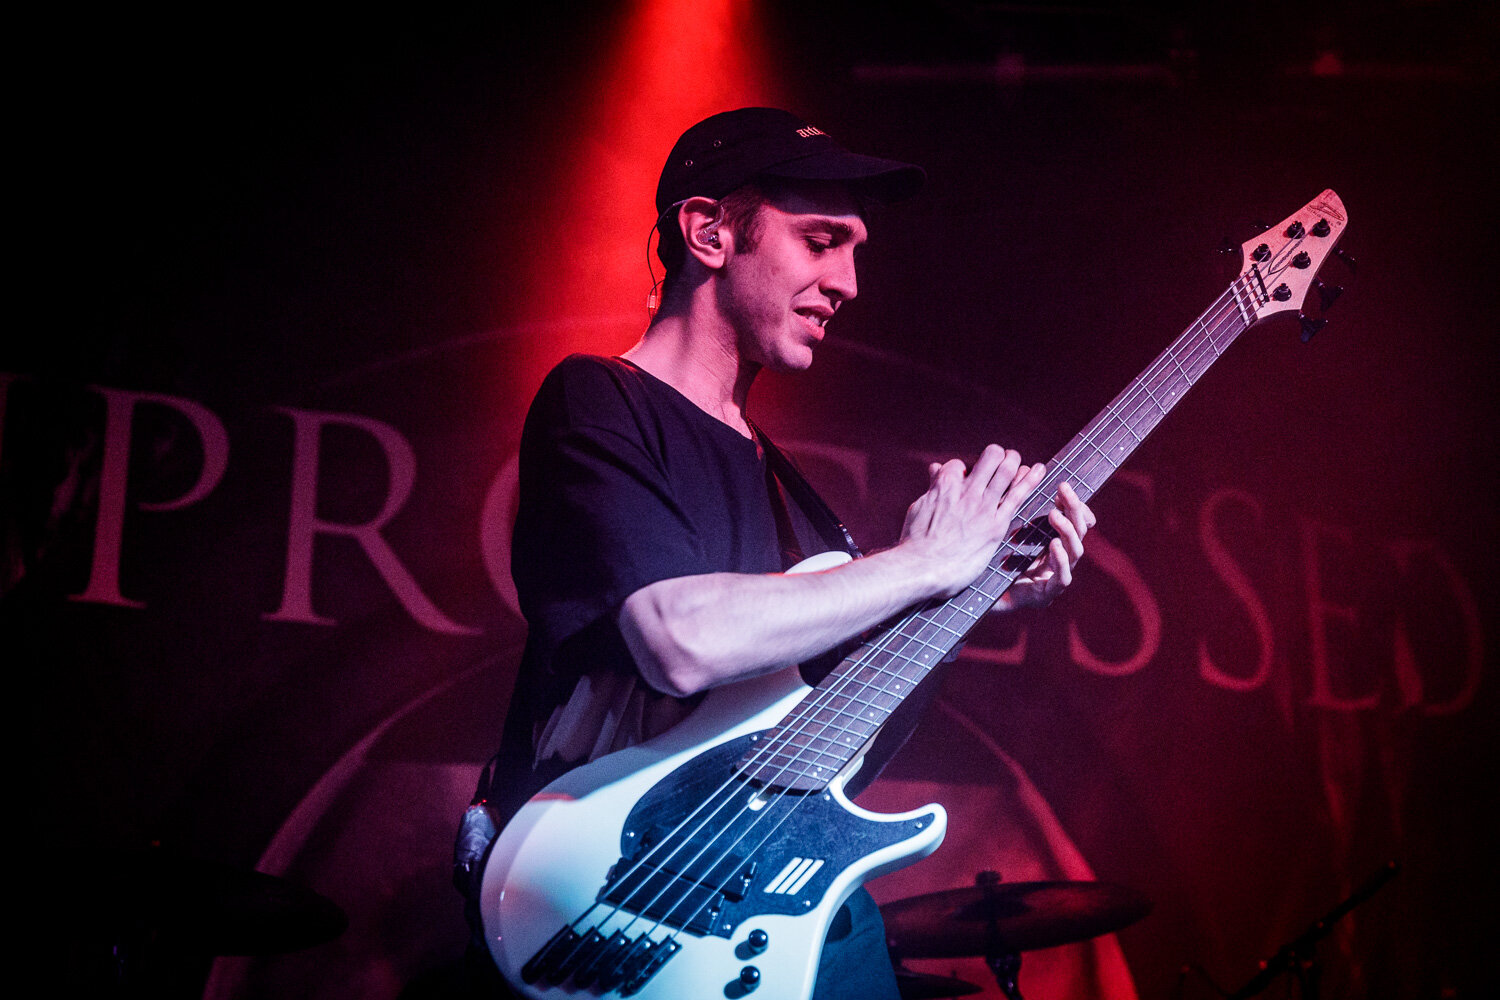 Unprocessed at the Live Rooms in Chester on November 26th 2019 ©Johann Wierzbicki | ROCKFLESH